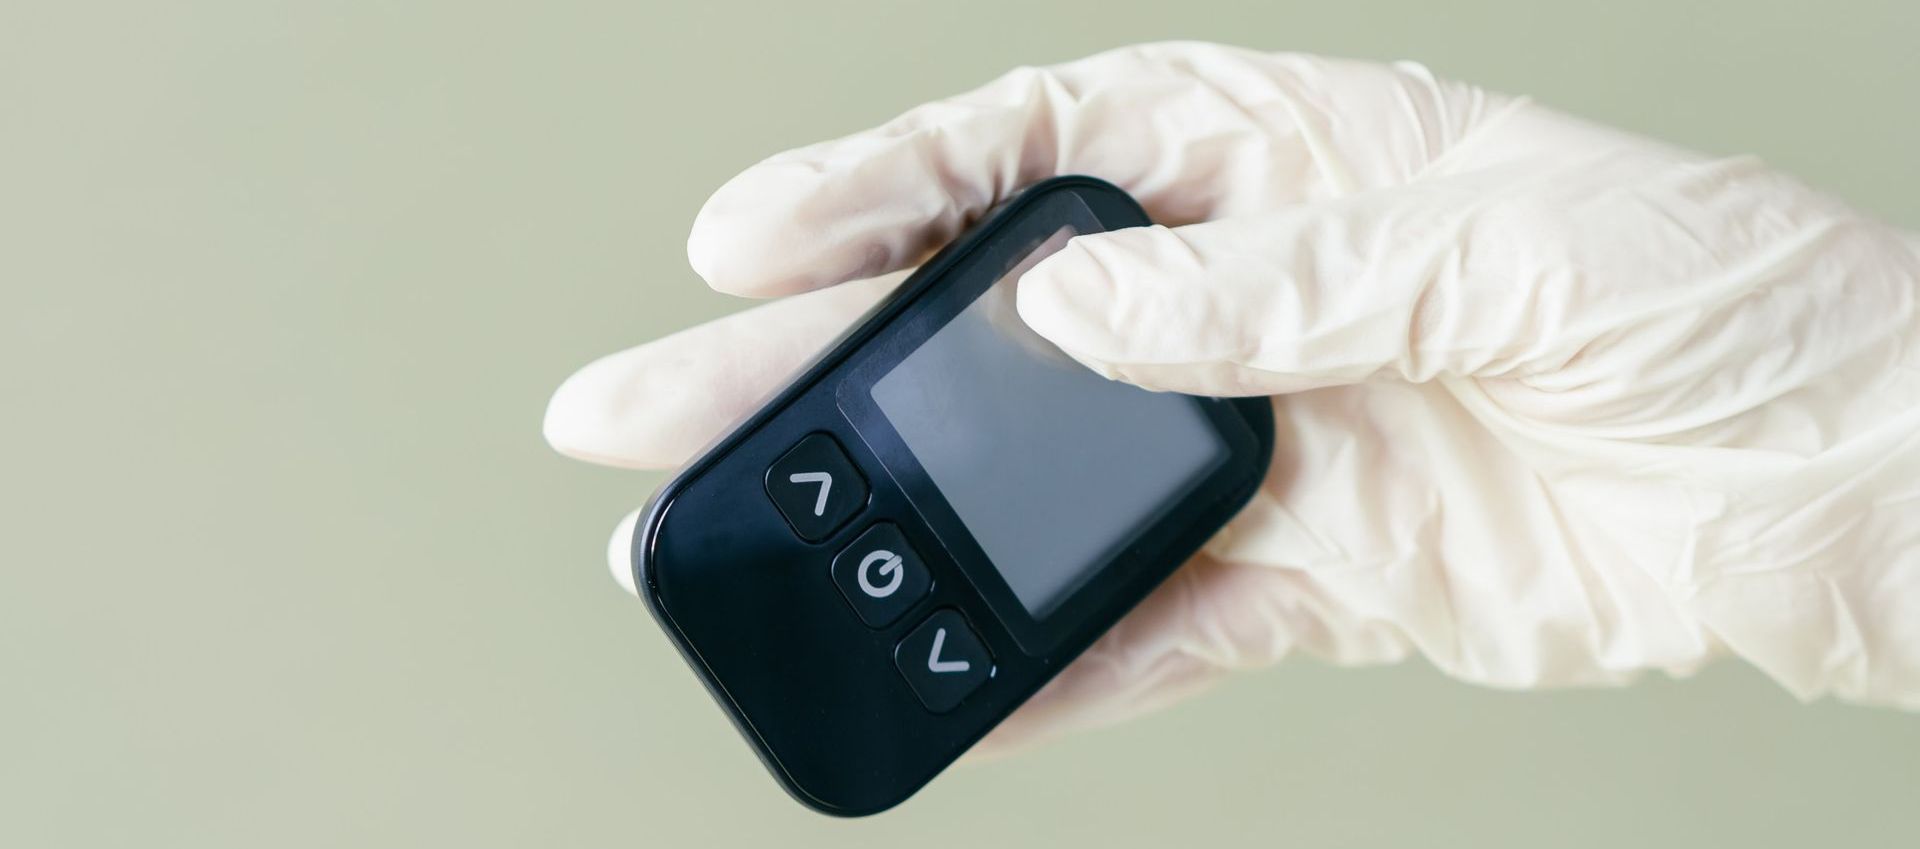 gloved hand holding a diabetic monitor